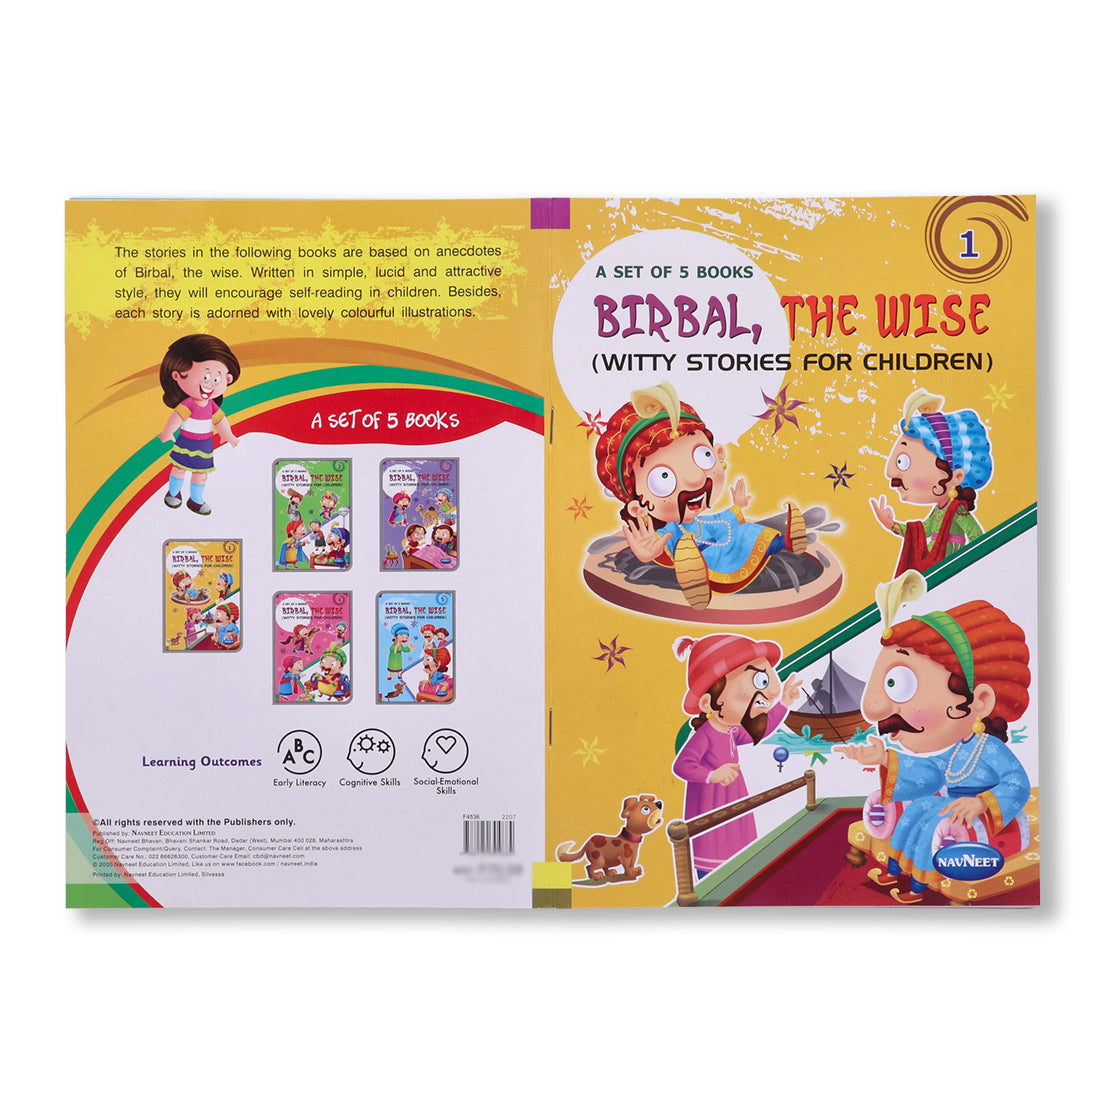 Navneet Birbal The Wise Books 1 to 5- With Colourful Illustrations- Akbar & Birbal- Read aloud stories for kids- Best collection of witty stories- Classic Tales From India